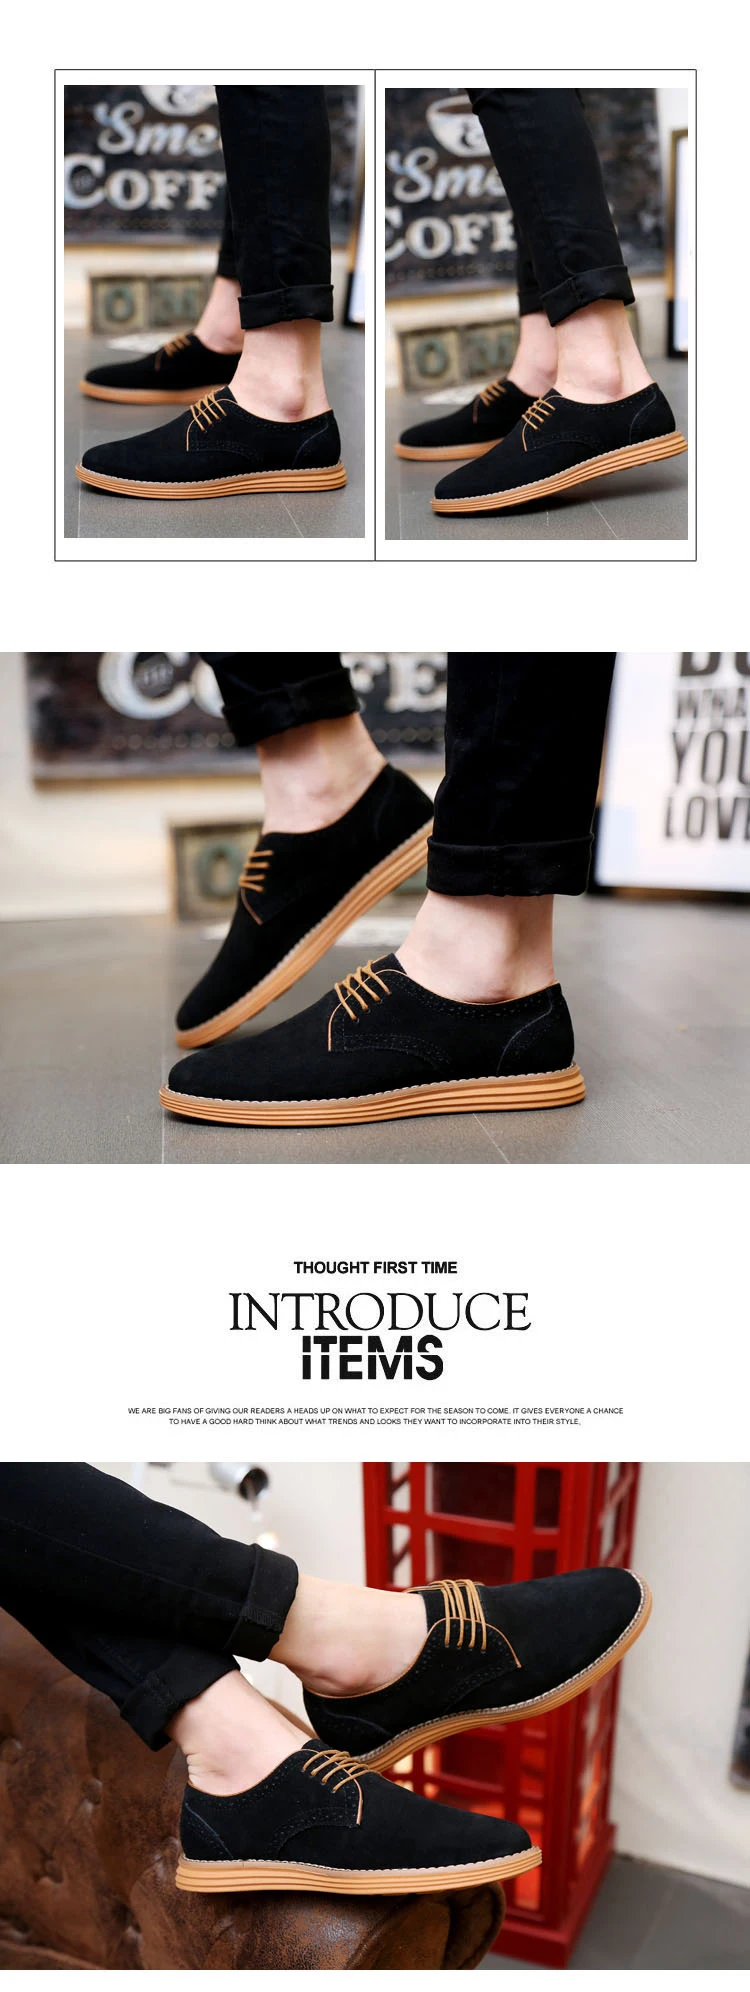 suede shoes (16)